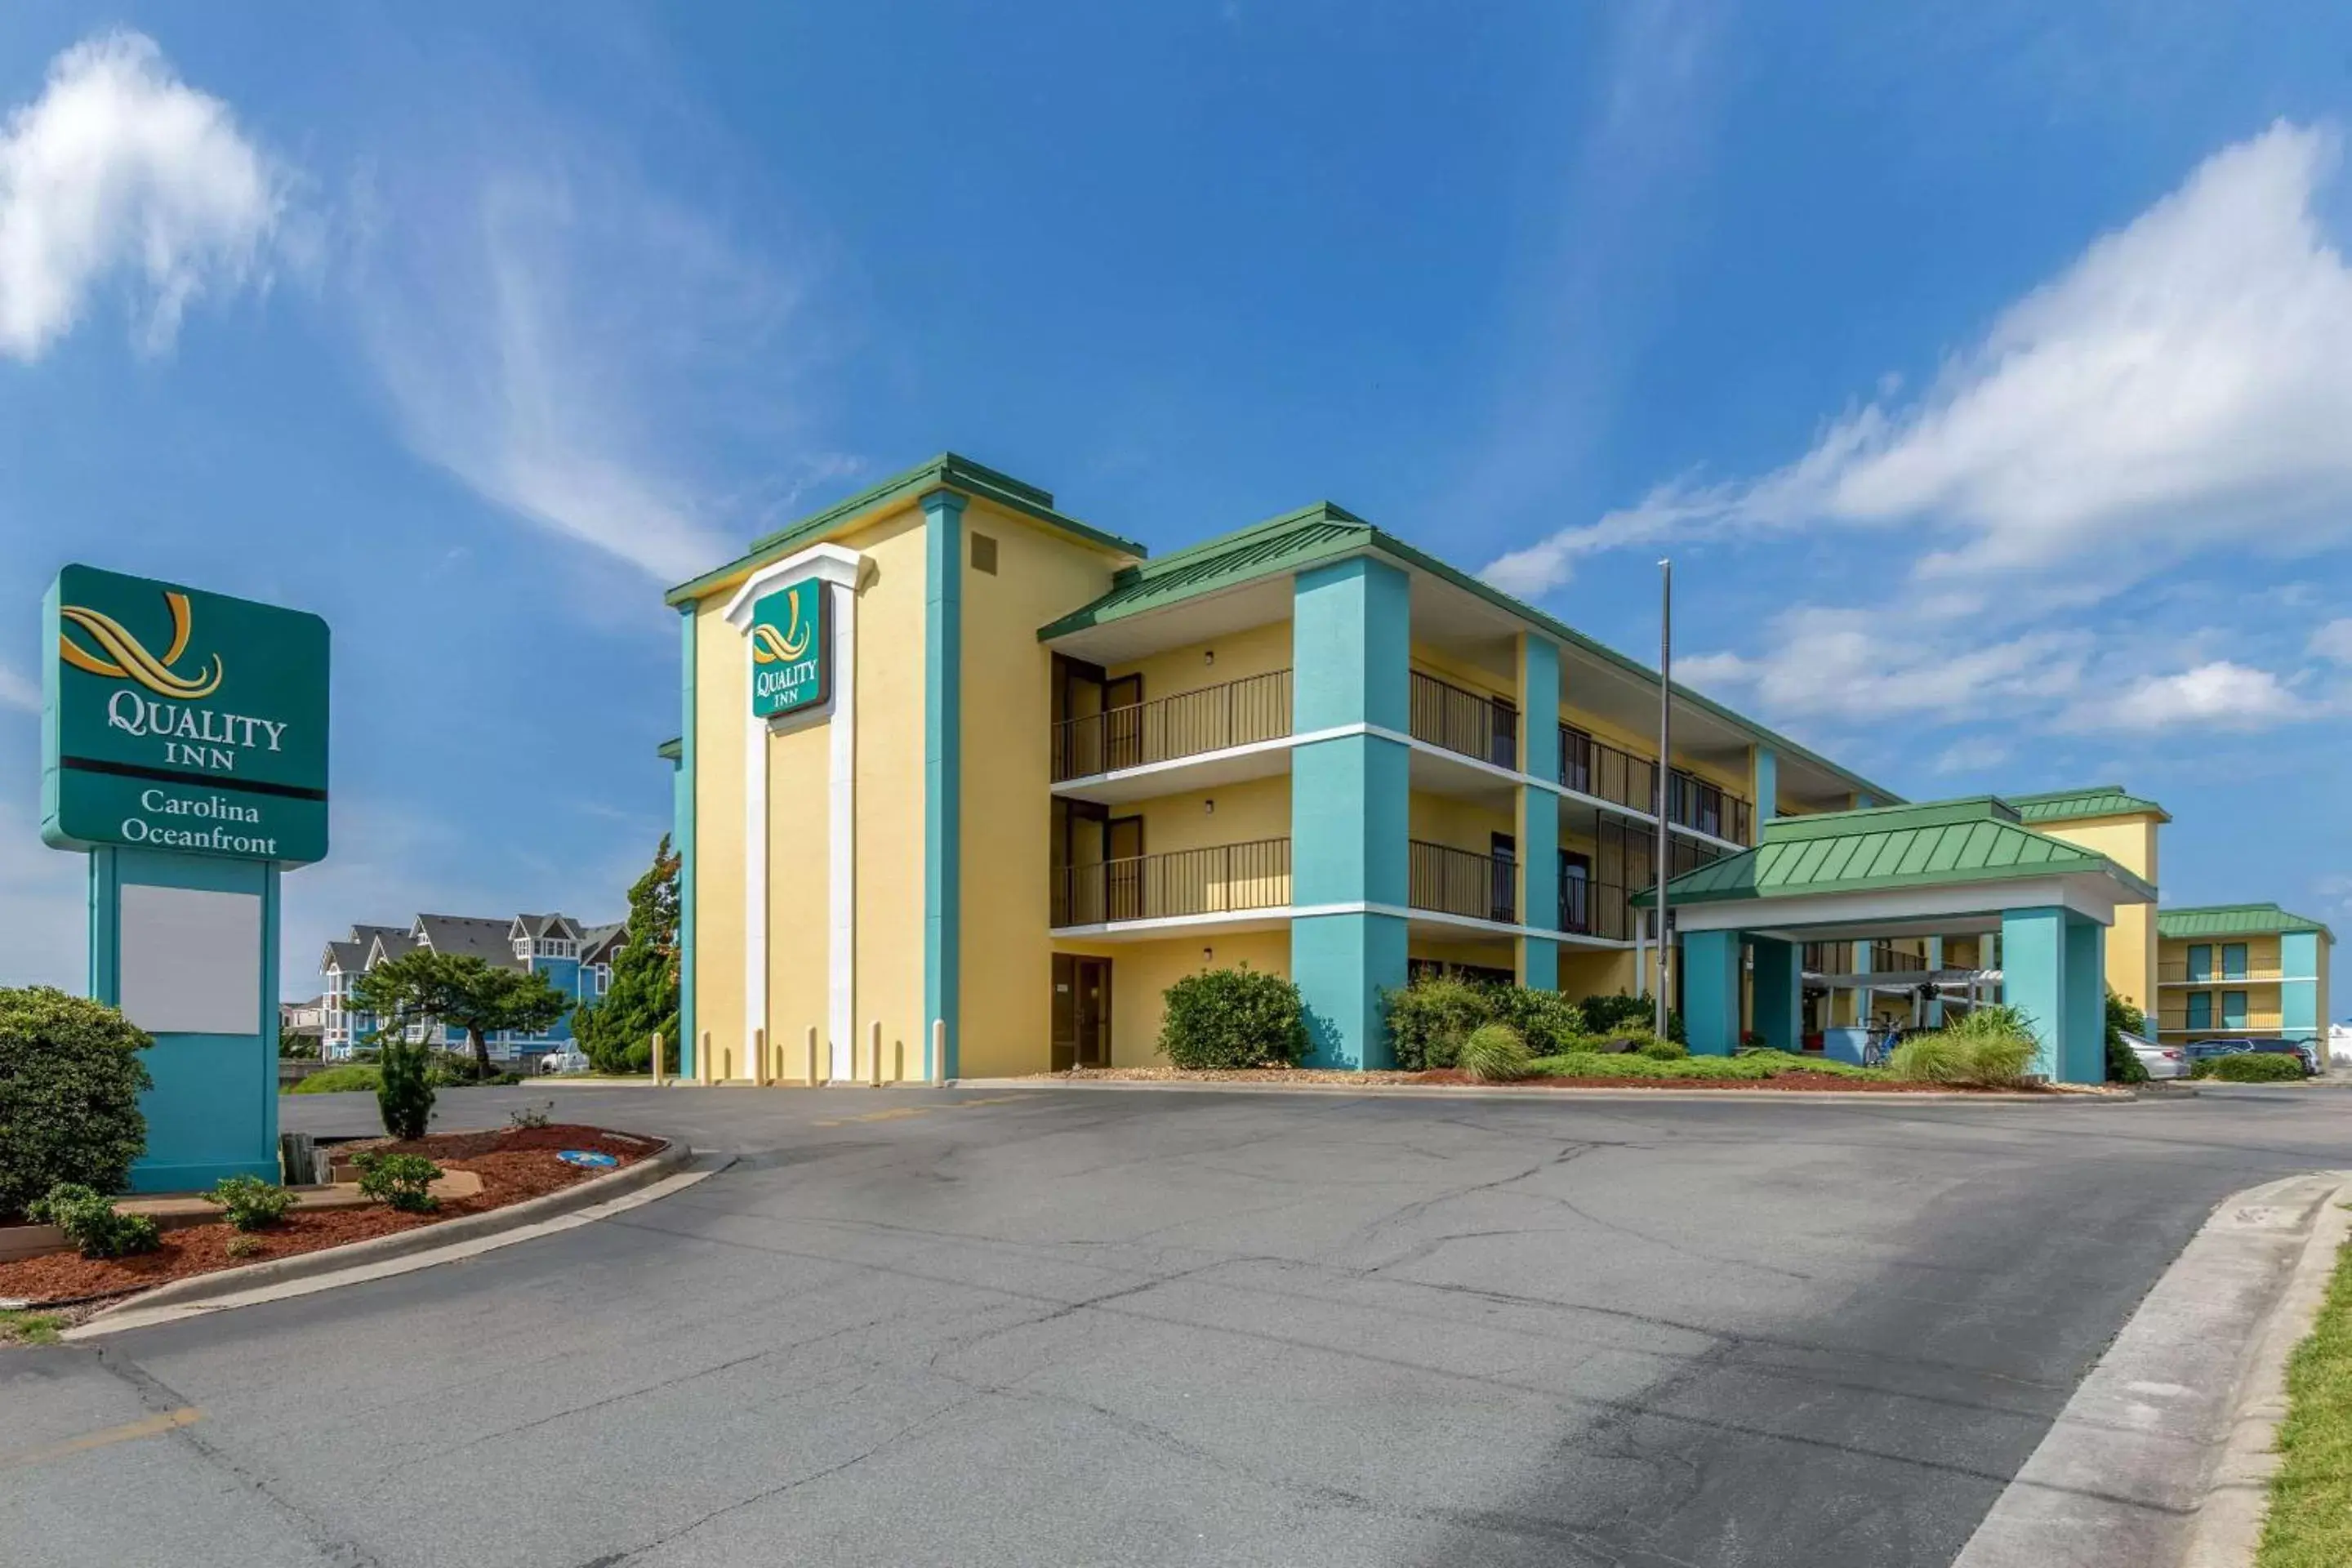 Property Building in Quality Inn Carolina Oceanfront